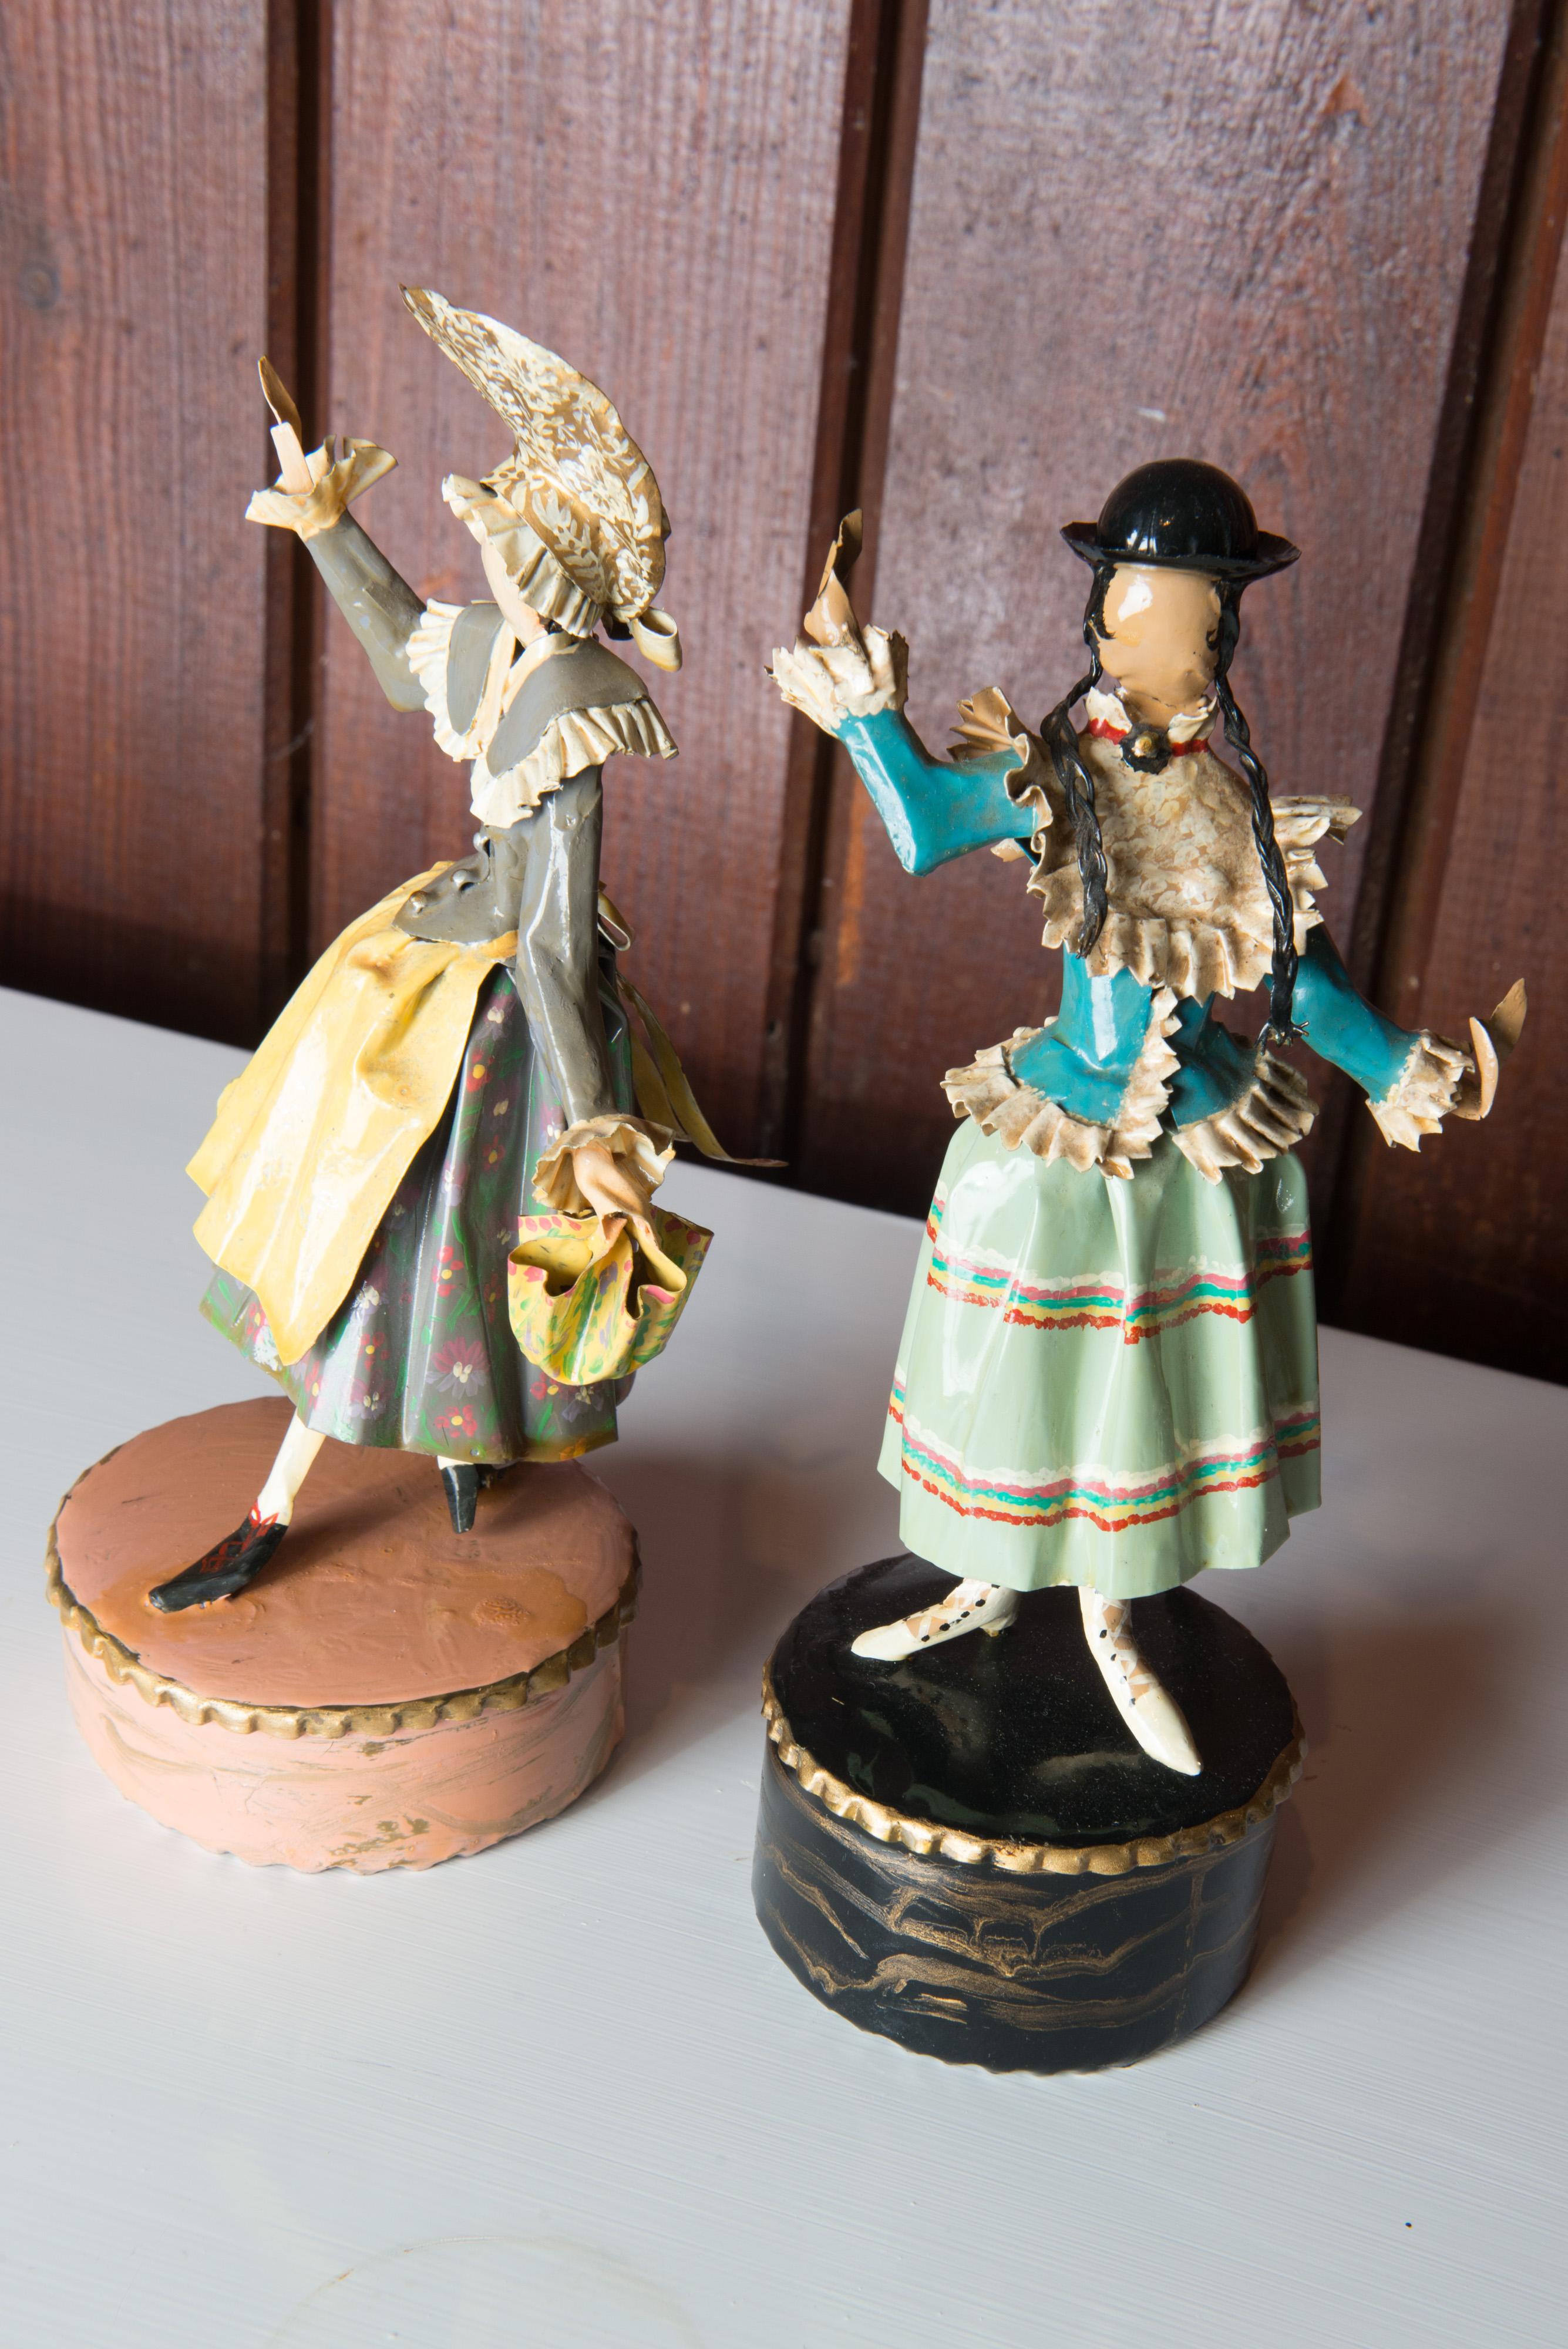 Pair of Figural Sculptures in Traditional Austrian Costumes by Lee Menichetti For Sale 11